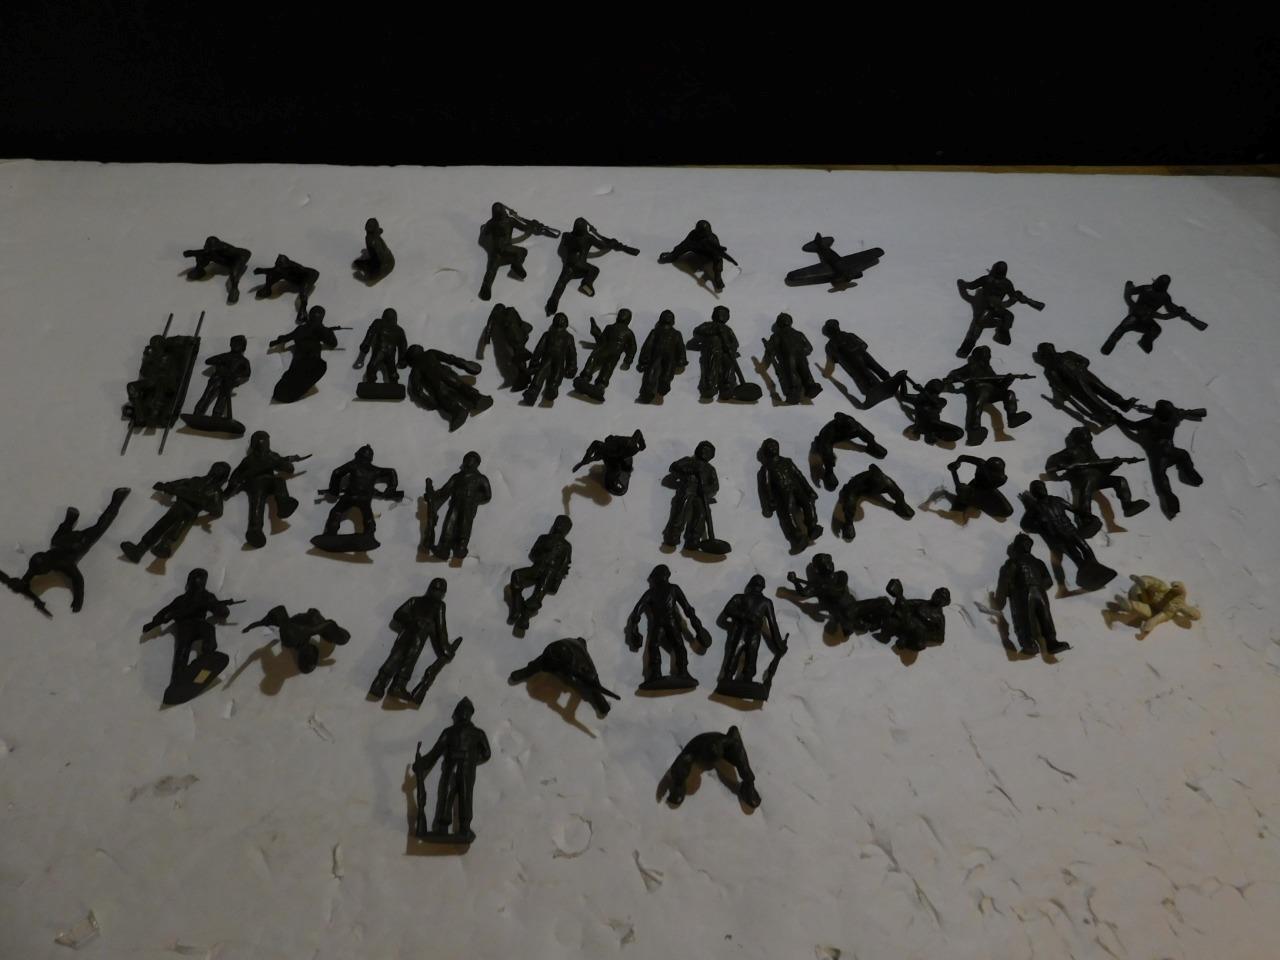 3 Lots of Plastic Toy soldiers 1:32? Over 100+ Various poses see photos